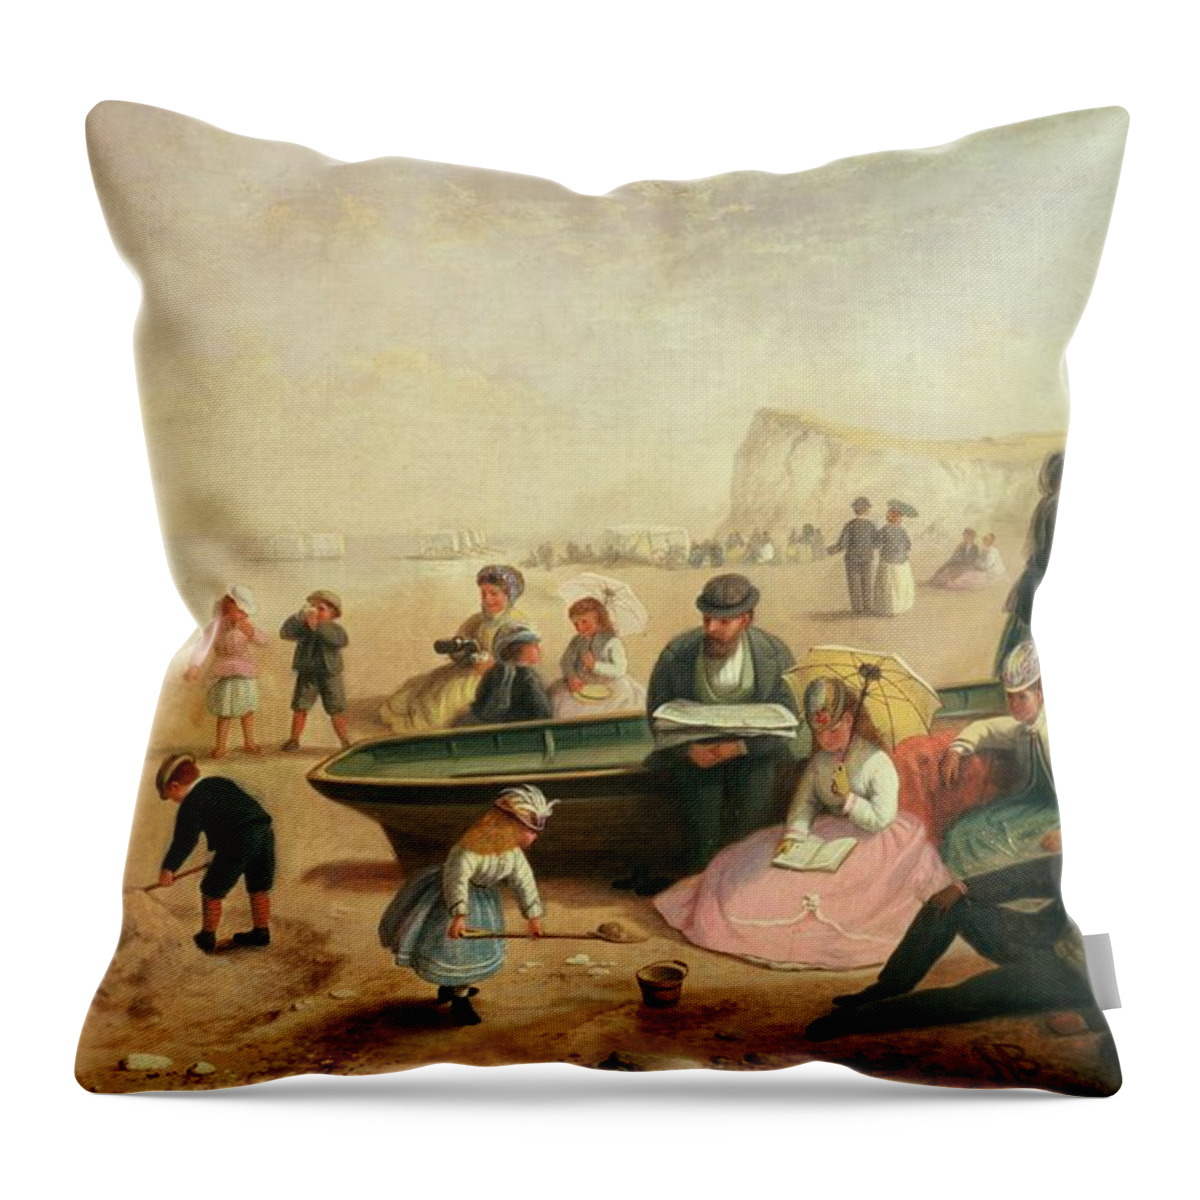 Seaside Throw Pillow featuring the painting A Seaside Scene by Jane Maria Bowkett